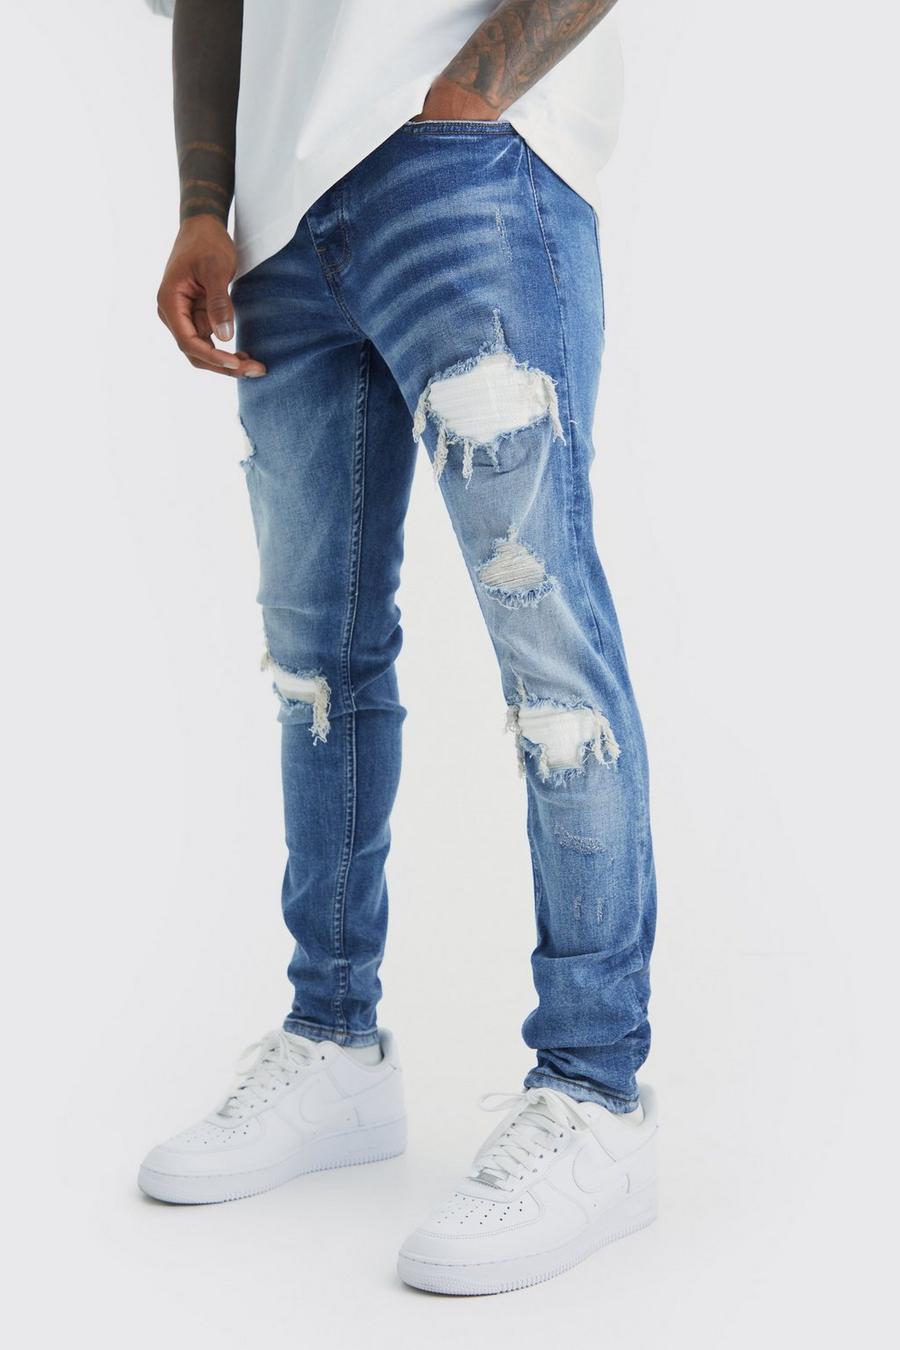 YYDGH On Clearance Mens Stretch Skinny Ripped Distressed Biker